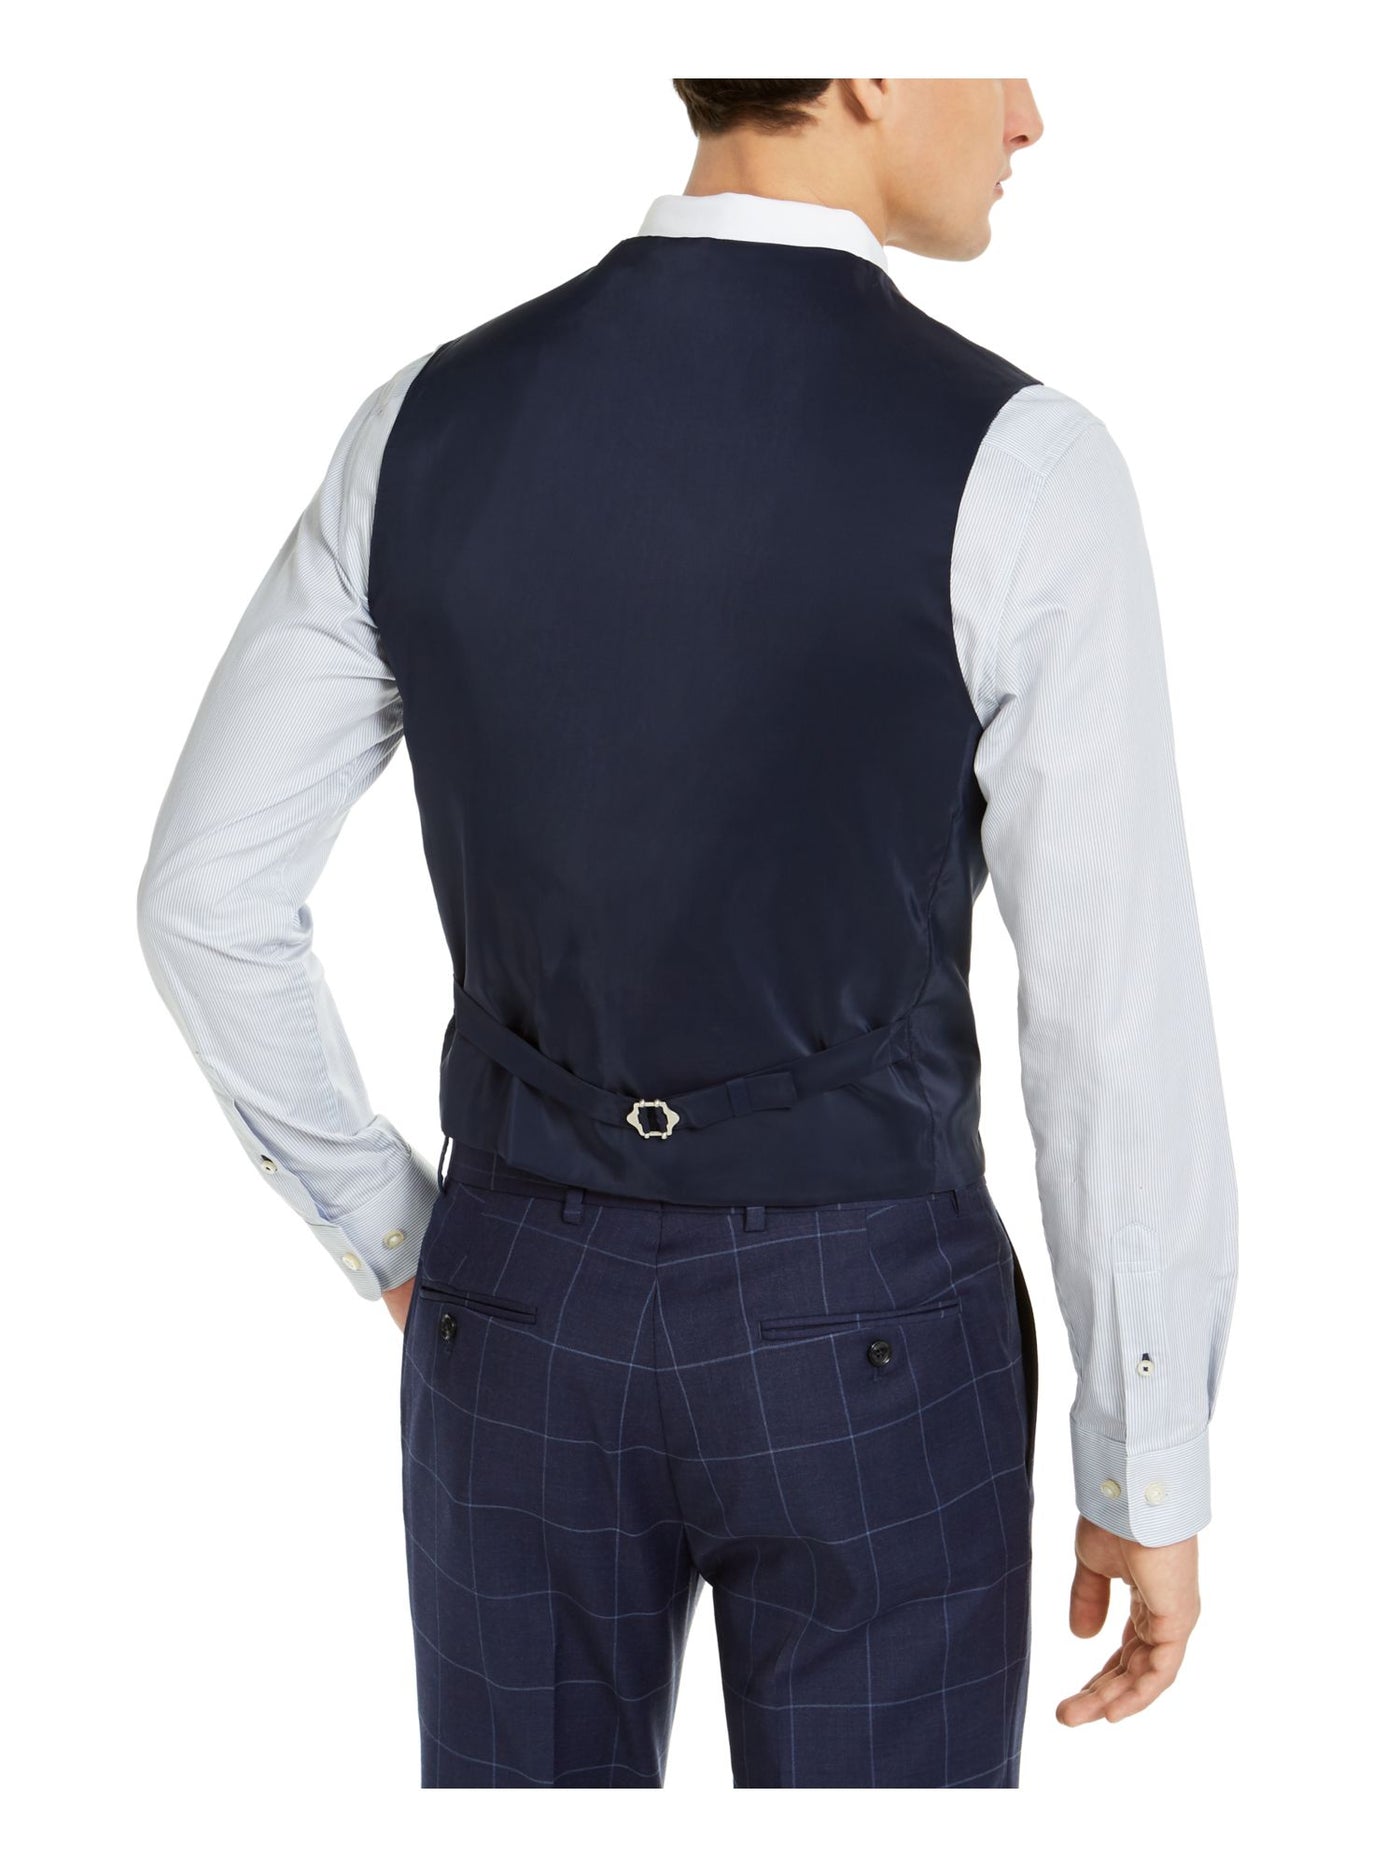 TOMMY HILFIGER Mens Navy Single Breasted, Windowpane Plaid Classic Fit Performance Stretch Suit Separate VestS